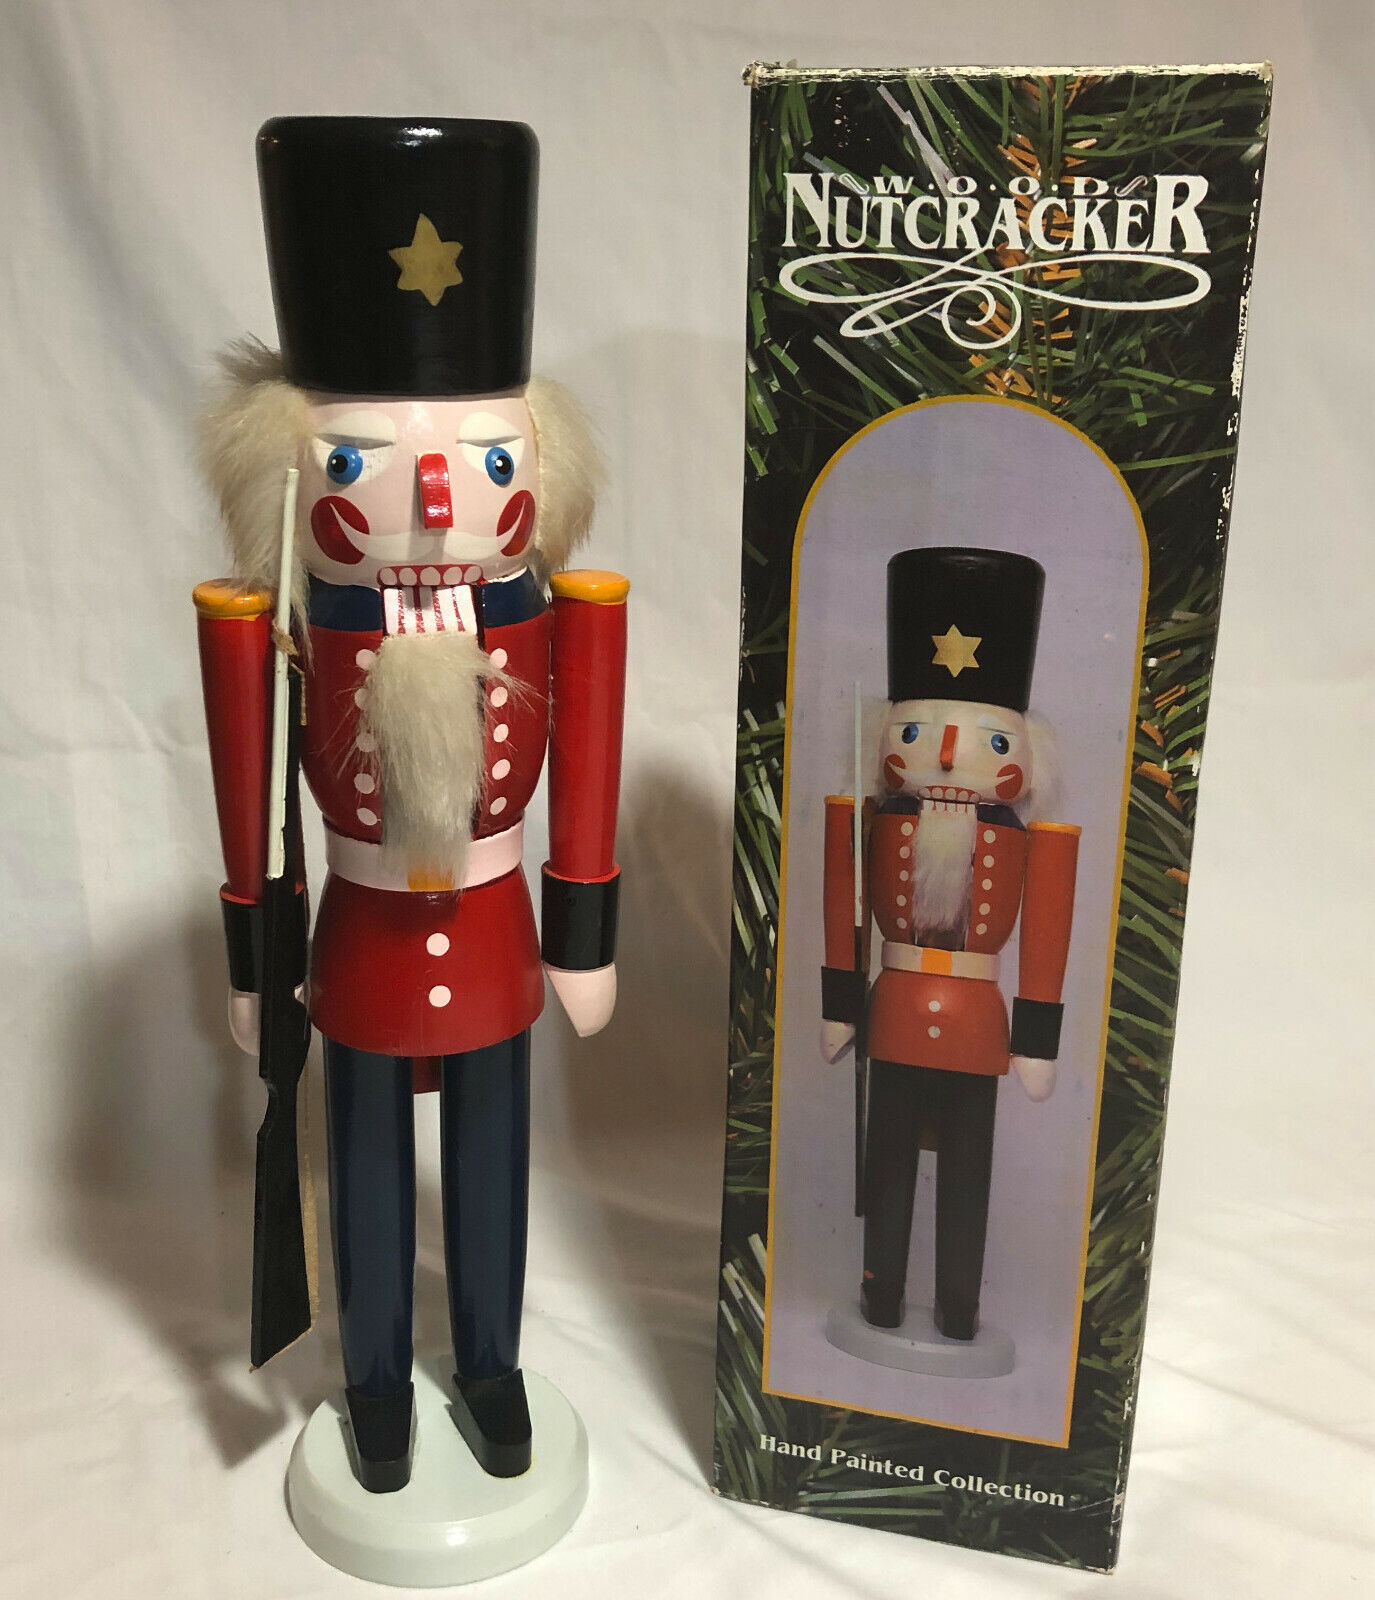 Wood Nutcracker Hand painted with Original Box